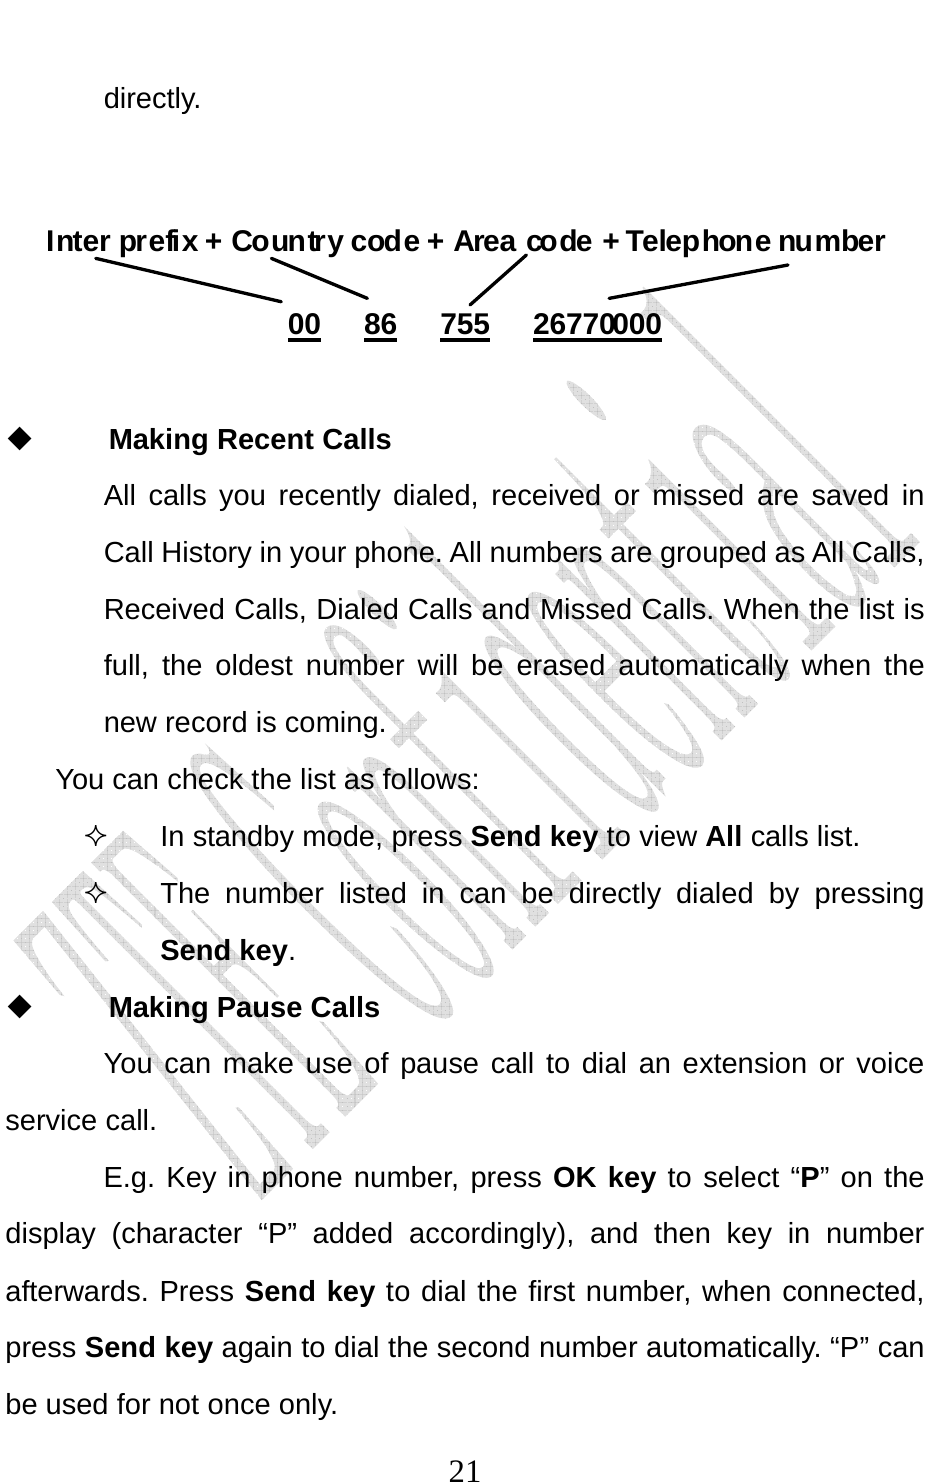                              21directly.      Inter prefix + Country code + Area code + Telephone number  00   86   755   26770000   Making Recent Calls All calls you recently dialed, received or missed are saved in Call History in your phone. All numbers are grouped as All Calls, Received Calls, Dialed Calls and Missed Calls. When the list is full, the oldest number will be erased automatically when the new record is coming.   You can check the list as follows:   In standby mode, press Send key to view All calls list.   The number listed in can be directly dialed by pressing Send key.  Making Pause Calls You can make use of pause call to dial an extension or voice service call.   E.g. Key in phone number, press OK key to select “P” on the display (character “P” added accordingly), and then key in number afterwards. Press Send key to dial the first number, when connected, press Send key again to dial the second number automatically. “P” can be used for not once only. 